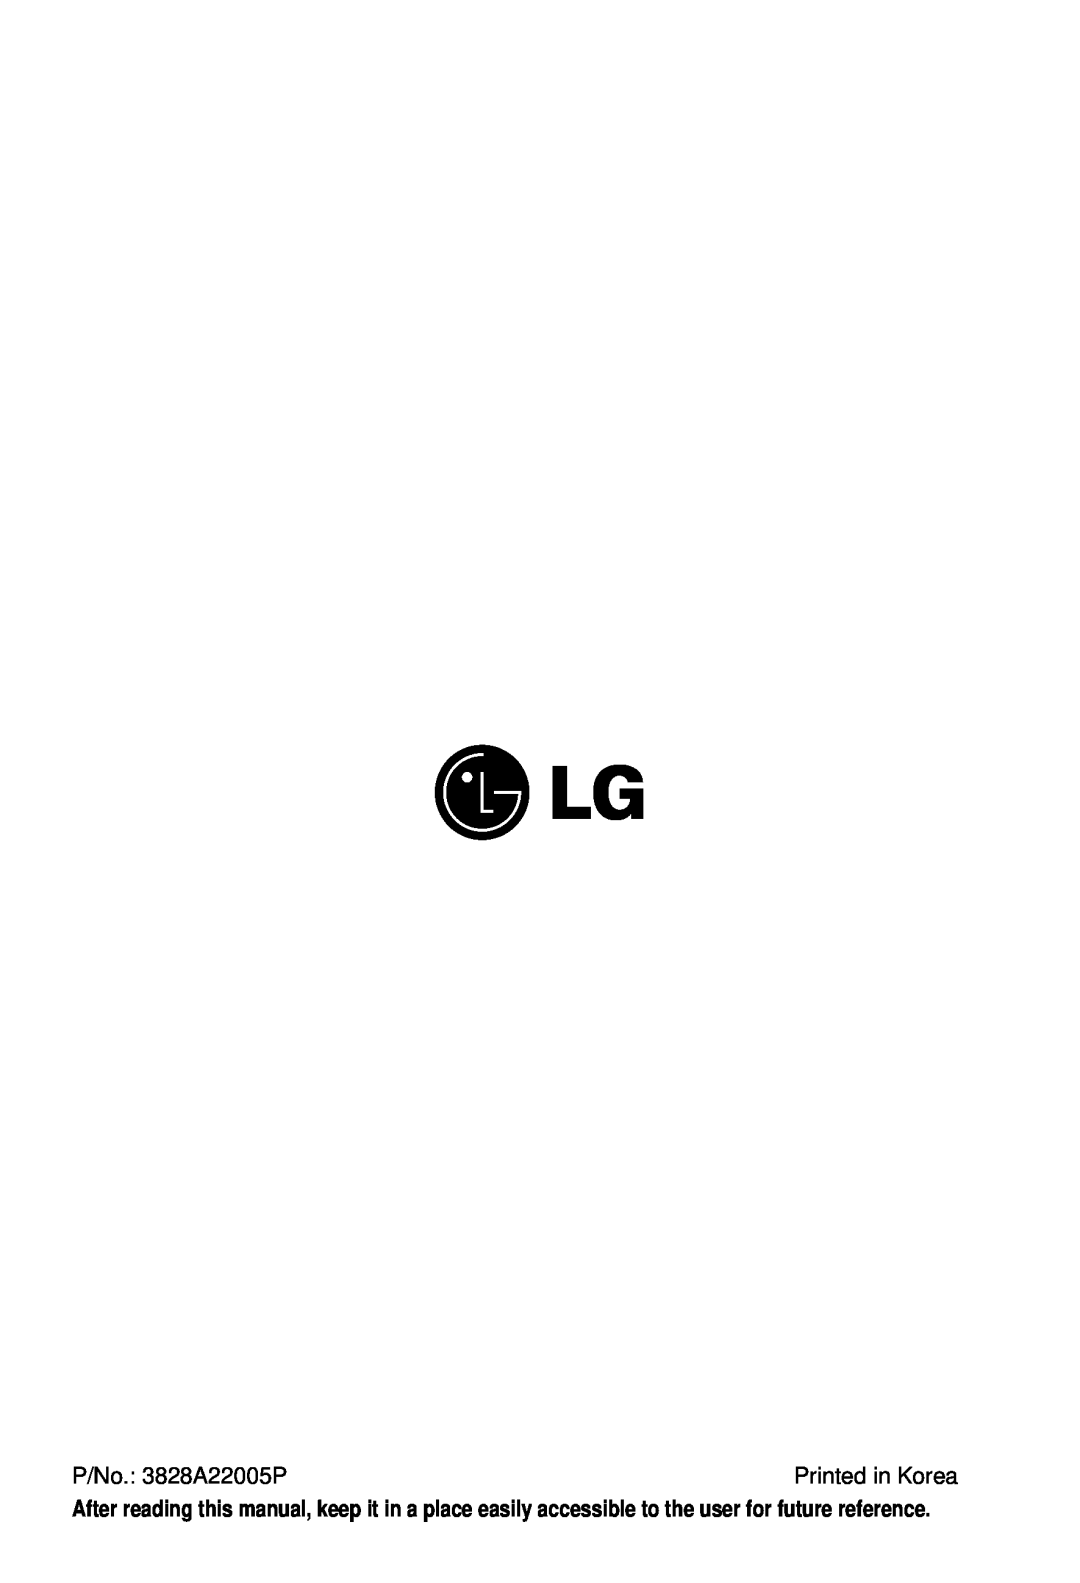 LG Electronics owner manual P/No. 3828A22005P, Printed in Korea 